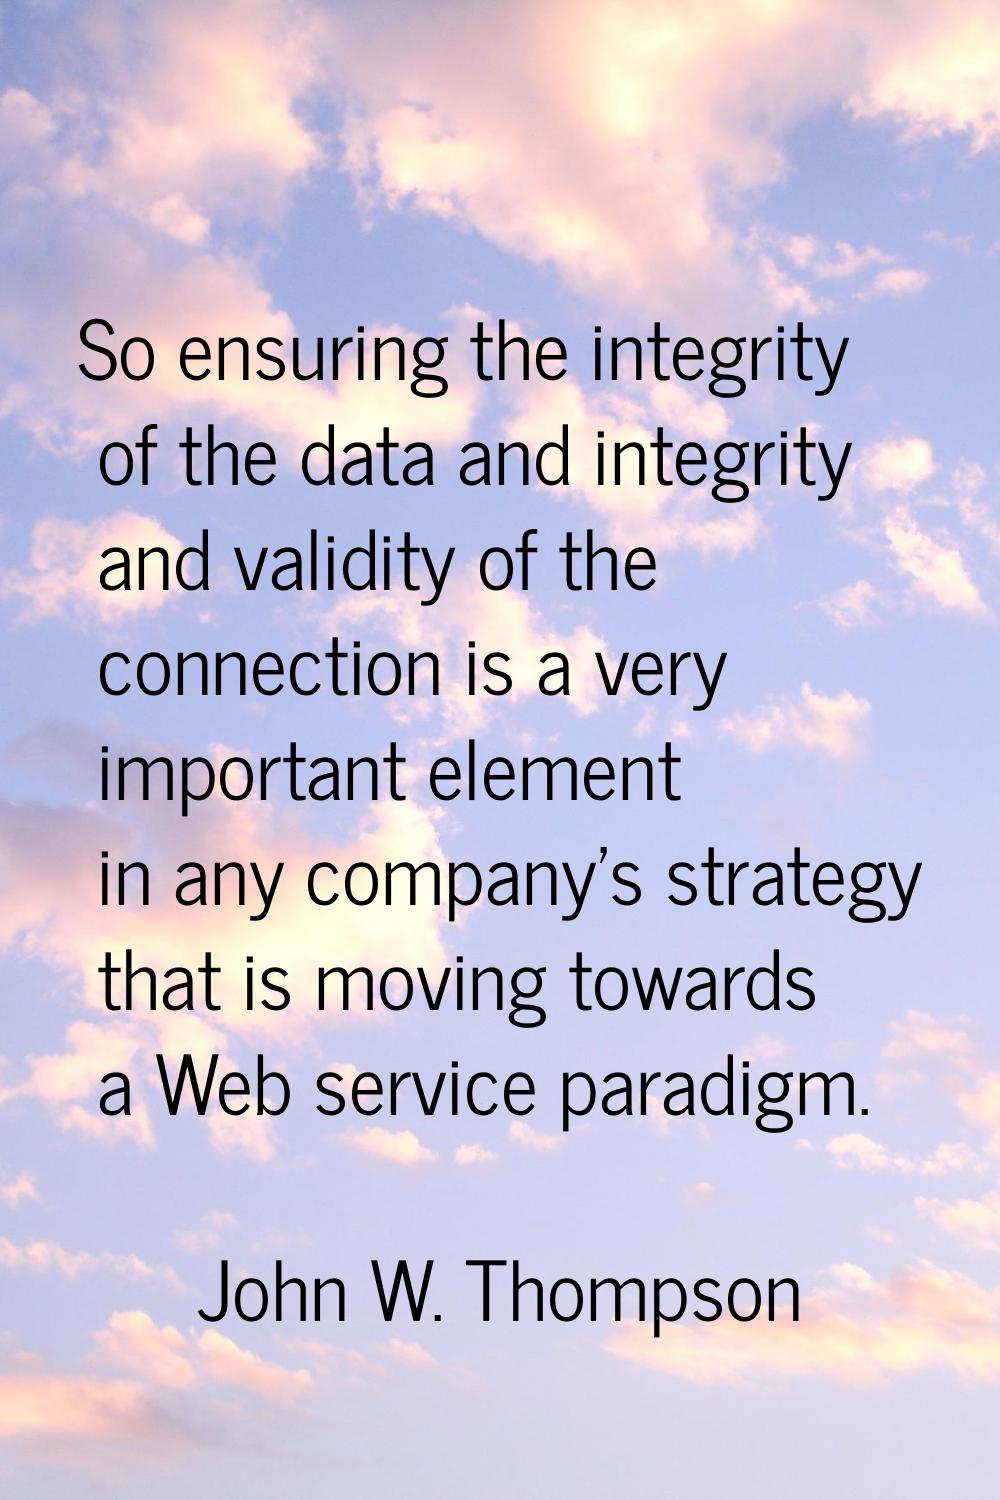 So ensuring the integrity of the data and integrity and validity of the connection is a very import